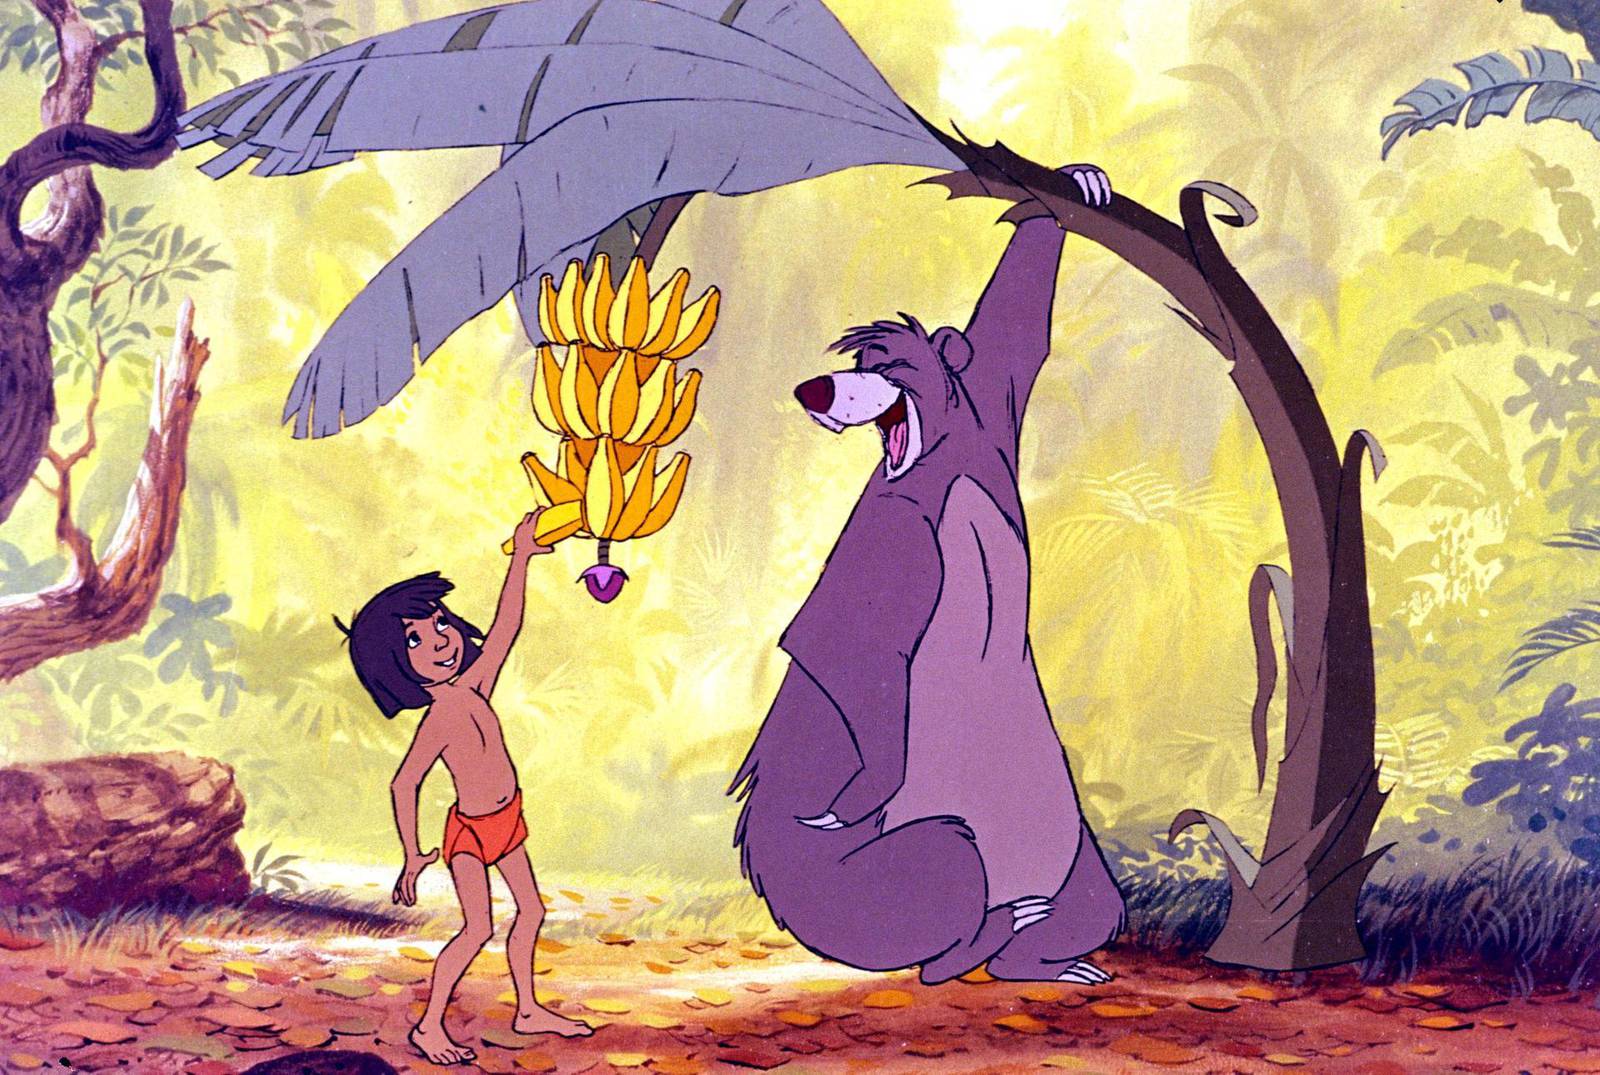 This May Contain Outdated Cultural Depictions Disney Includes Warning On Controversial Films 